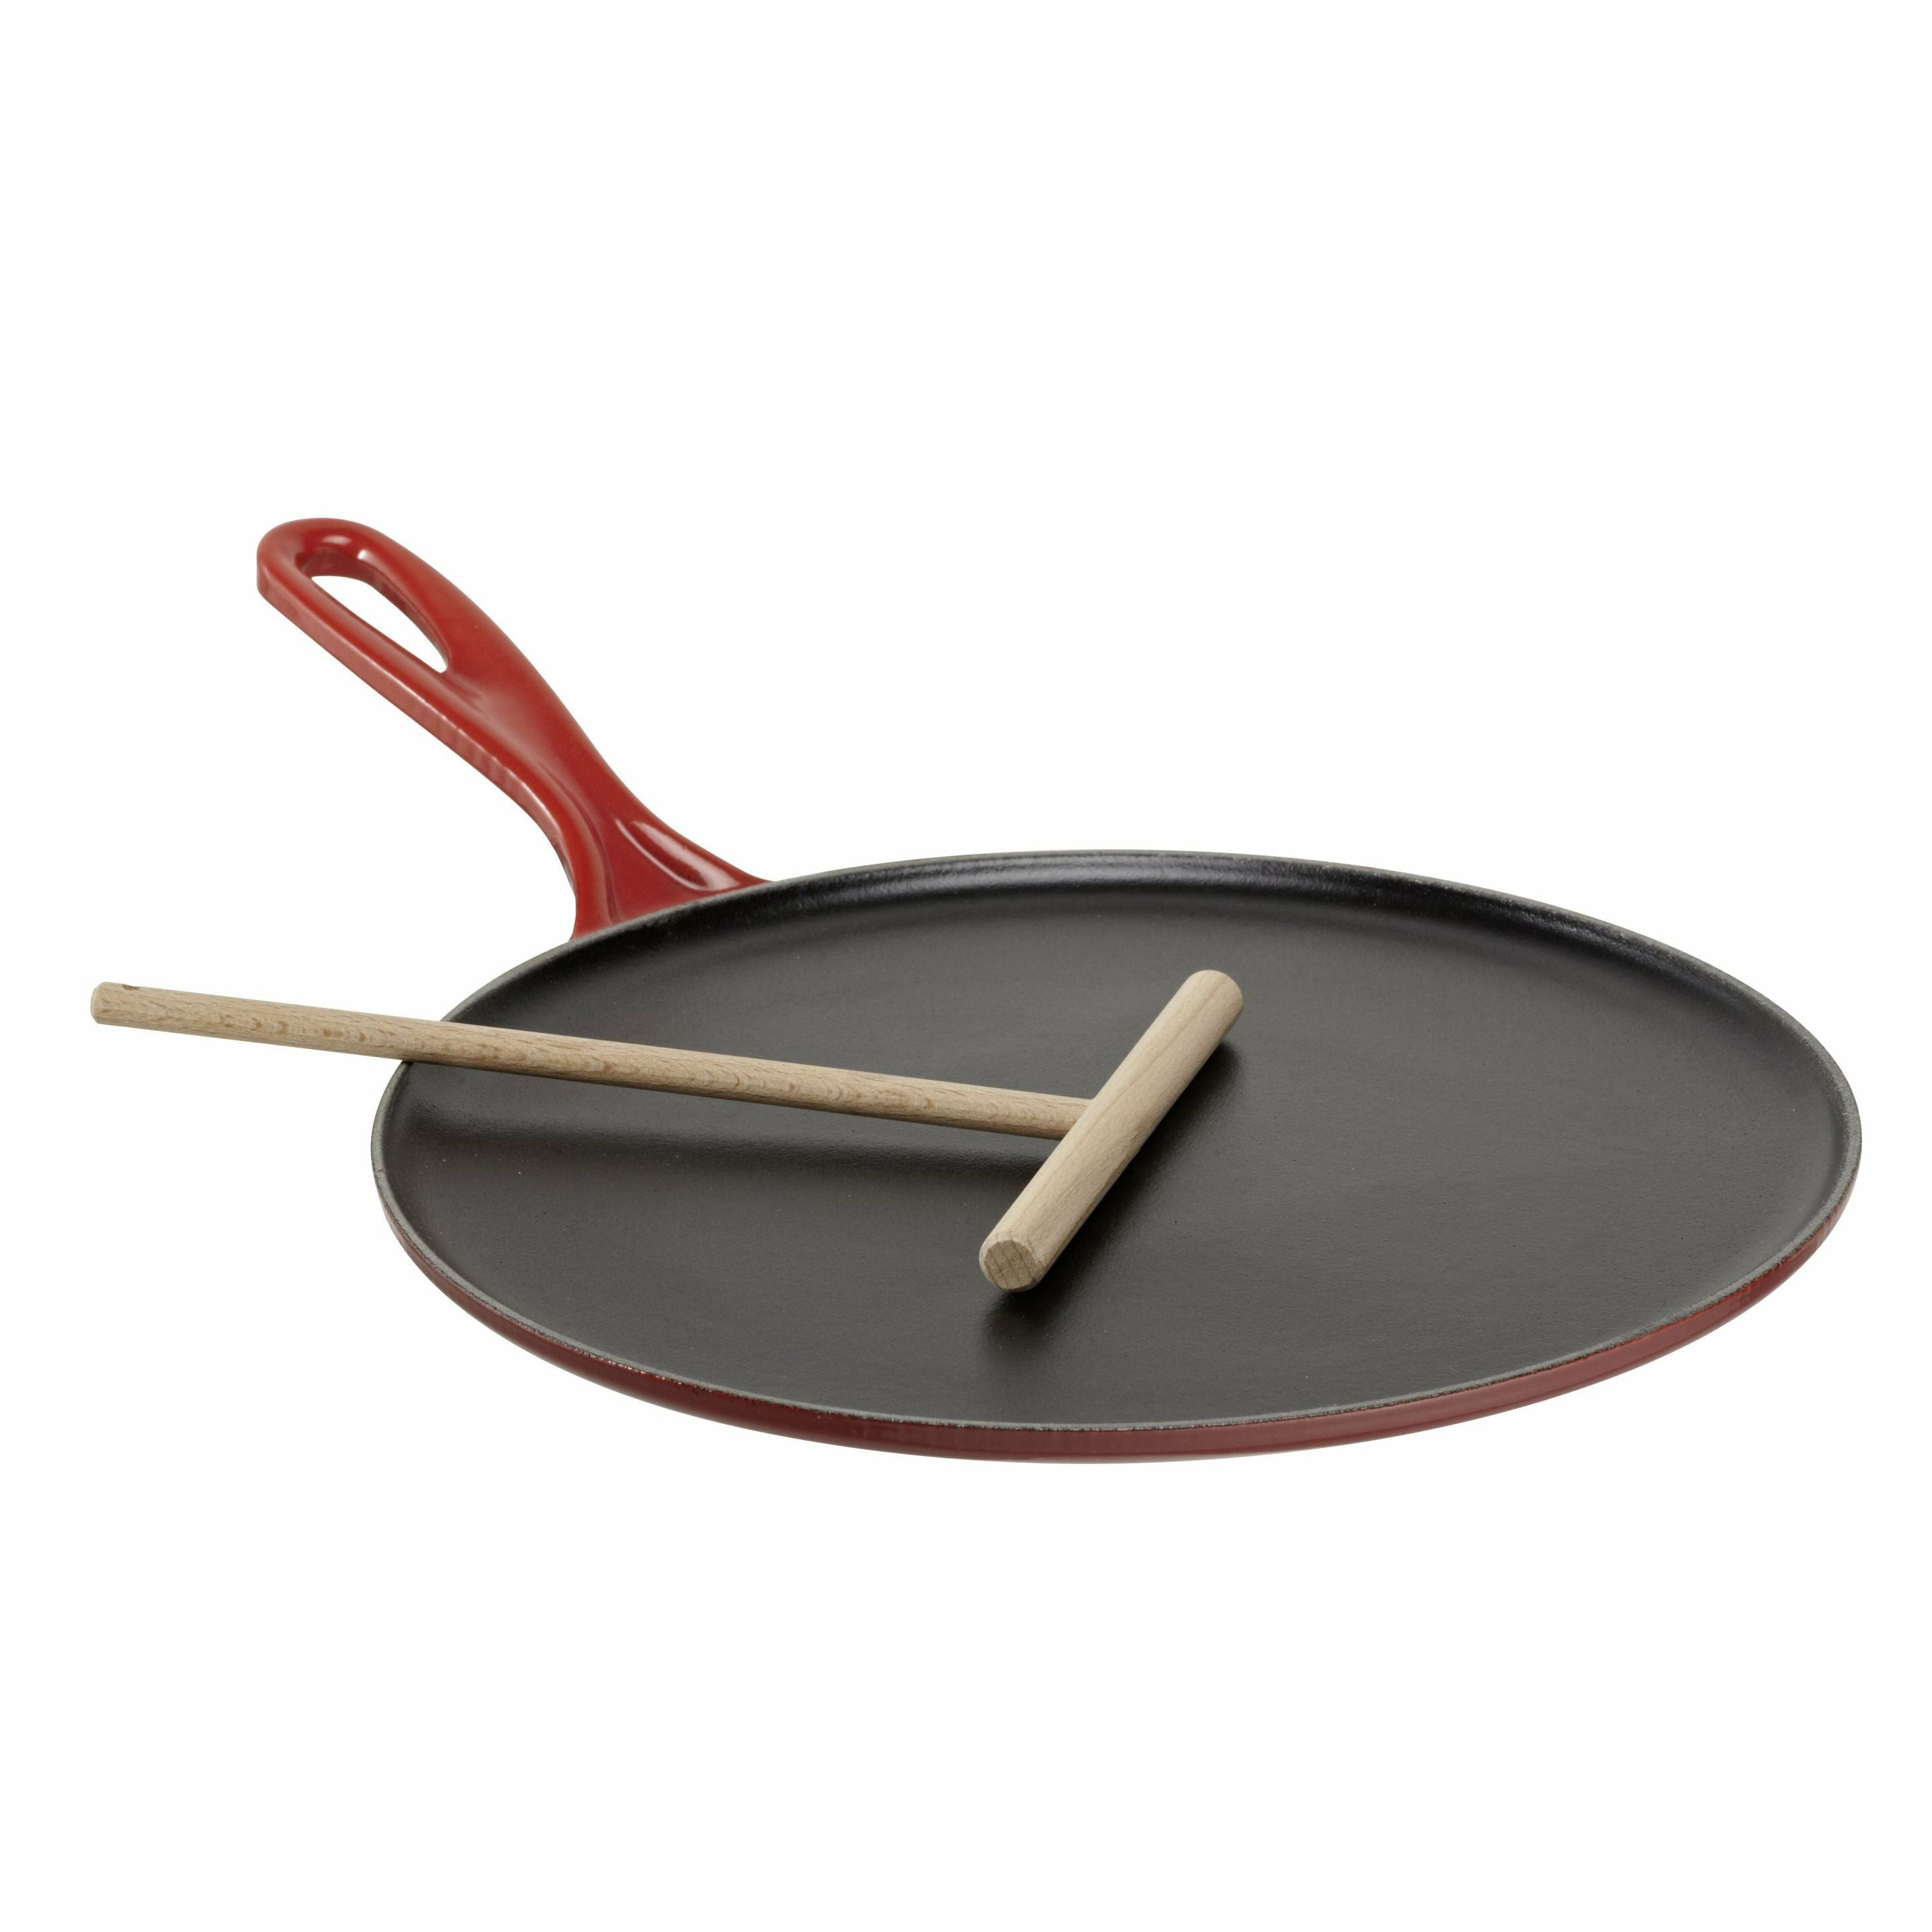 Le Creuset Tradition Crêpes Pan Small, Cherry Red